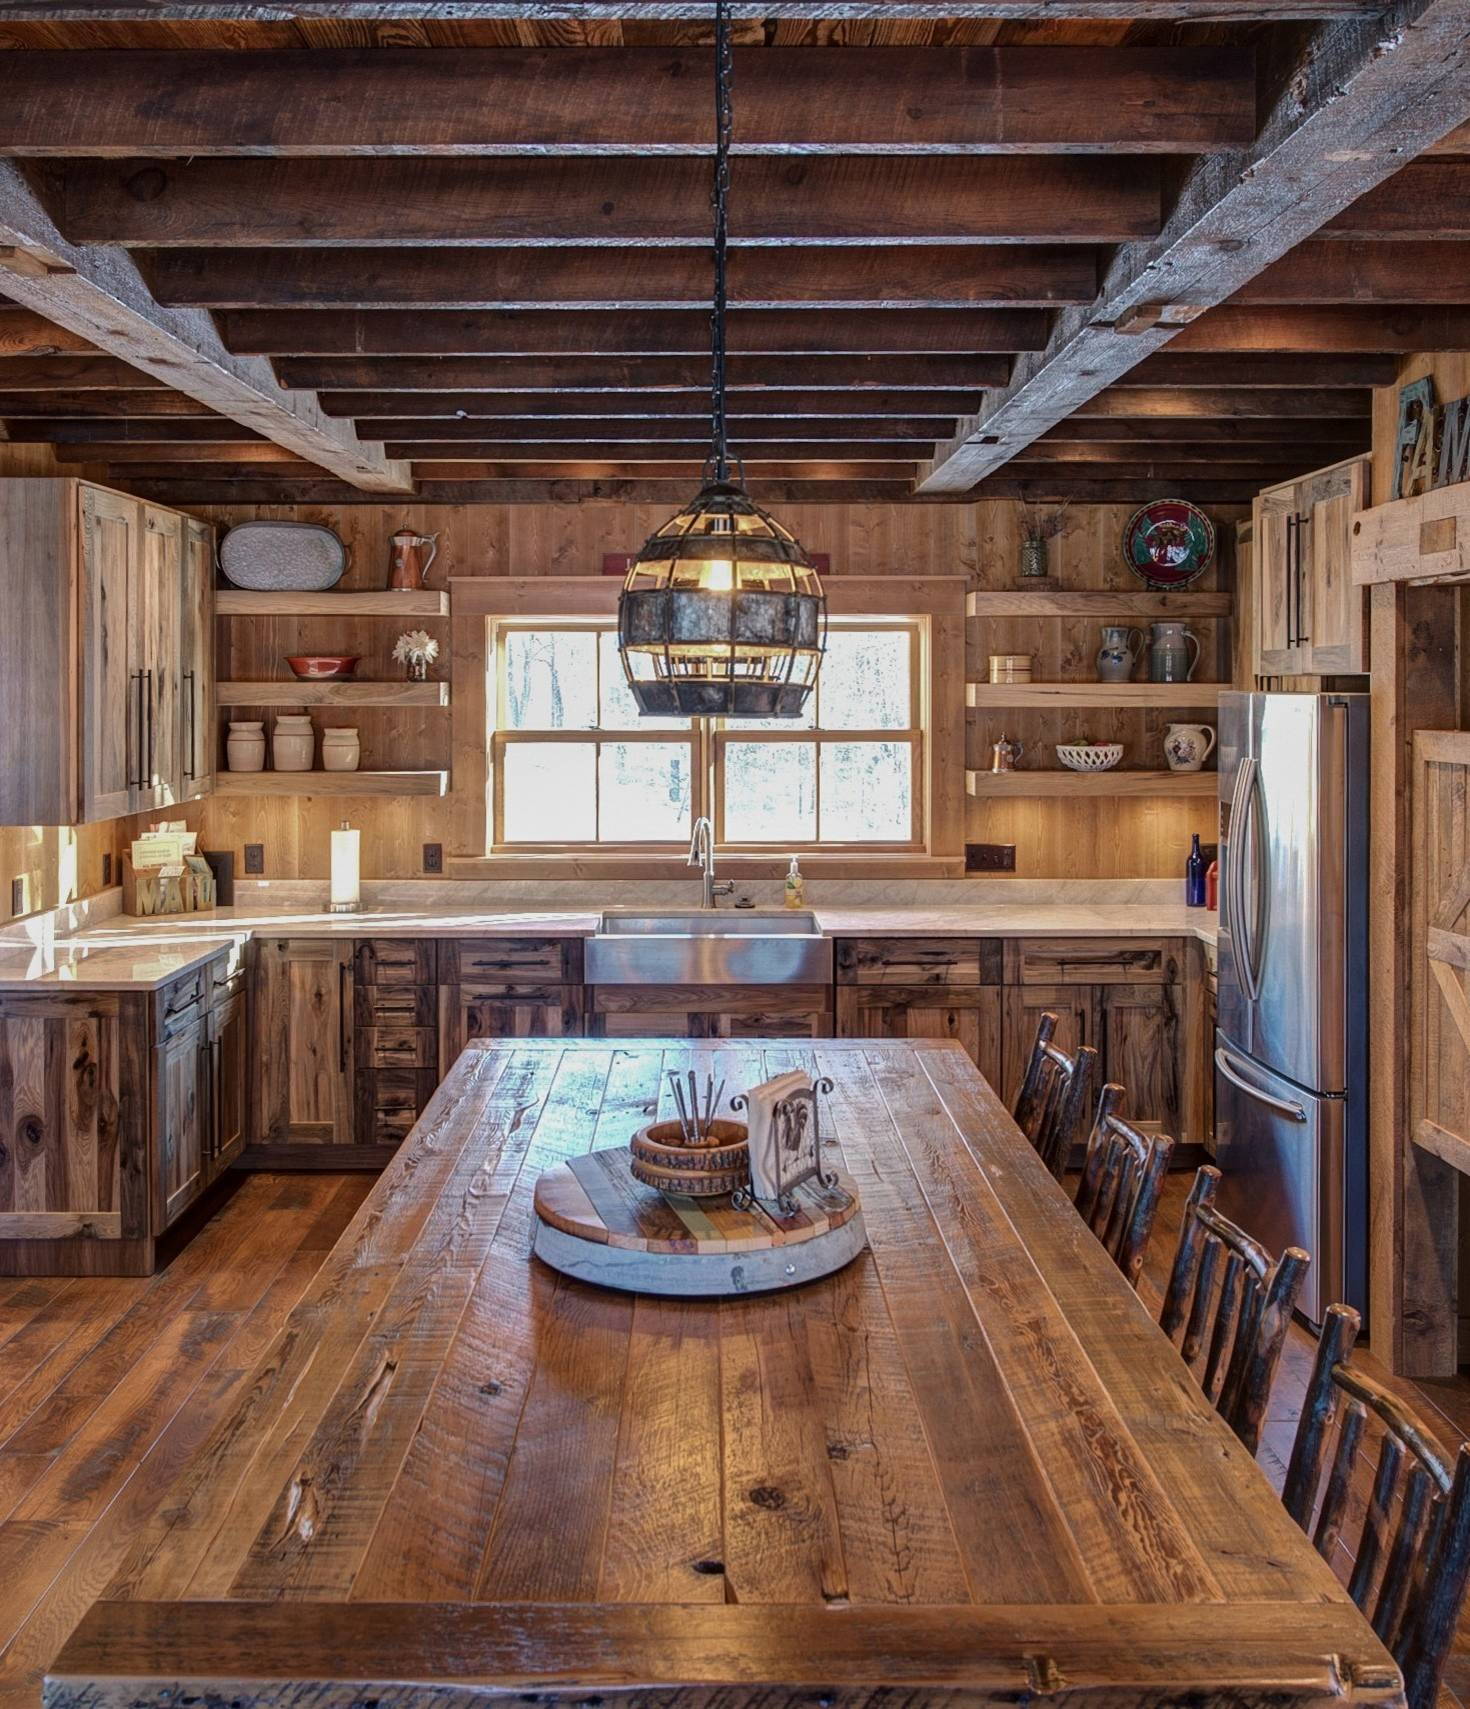 75 Beautiful Kitchen With Distressed Cabinets And Wood Backsplash Pictures Ideas December 2020 Houzz